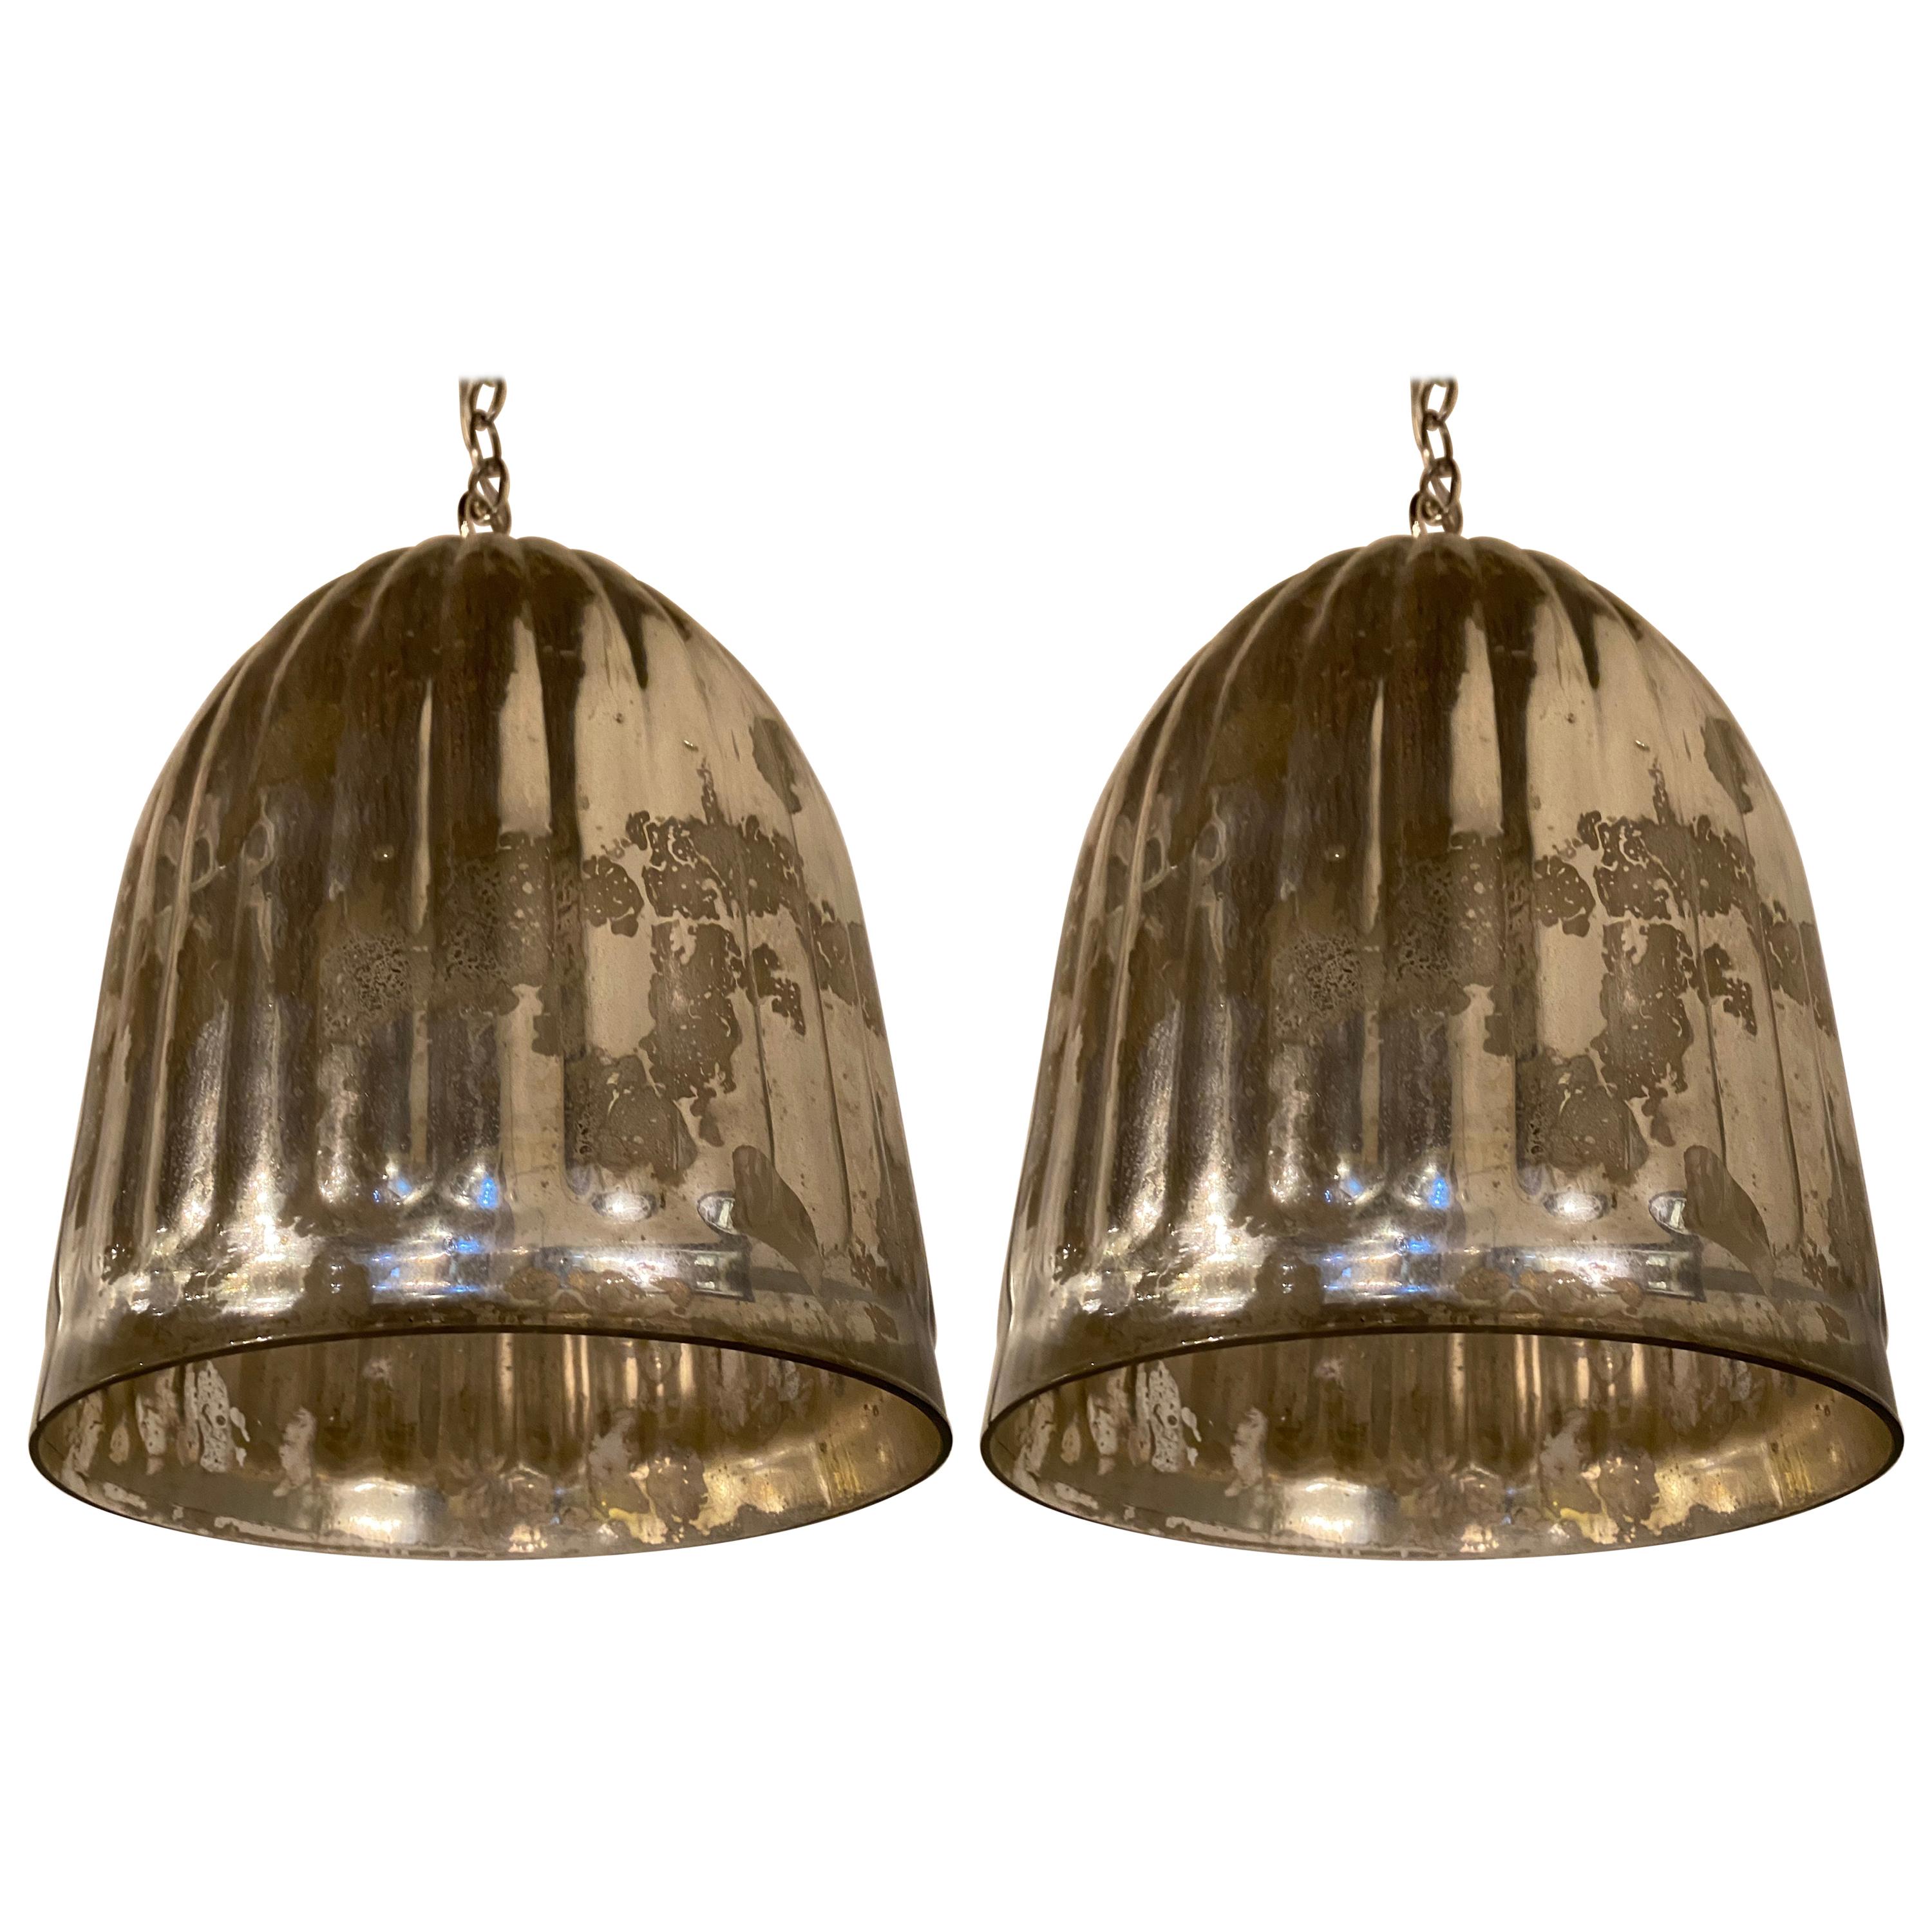 Matching Pair of Vintage Mercury Glass Fluted Industrial Style Pendant Lights